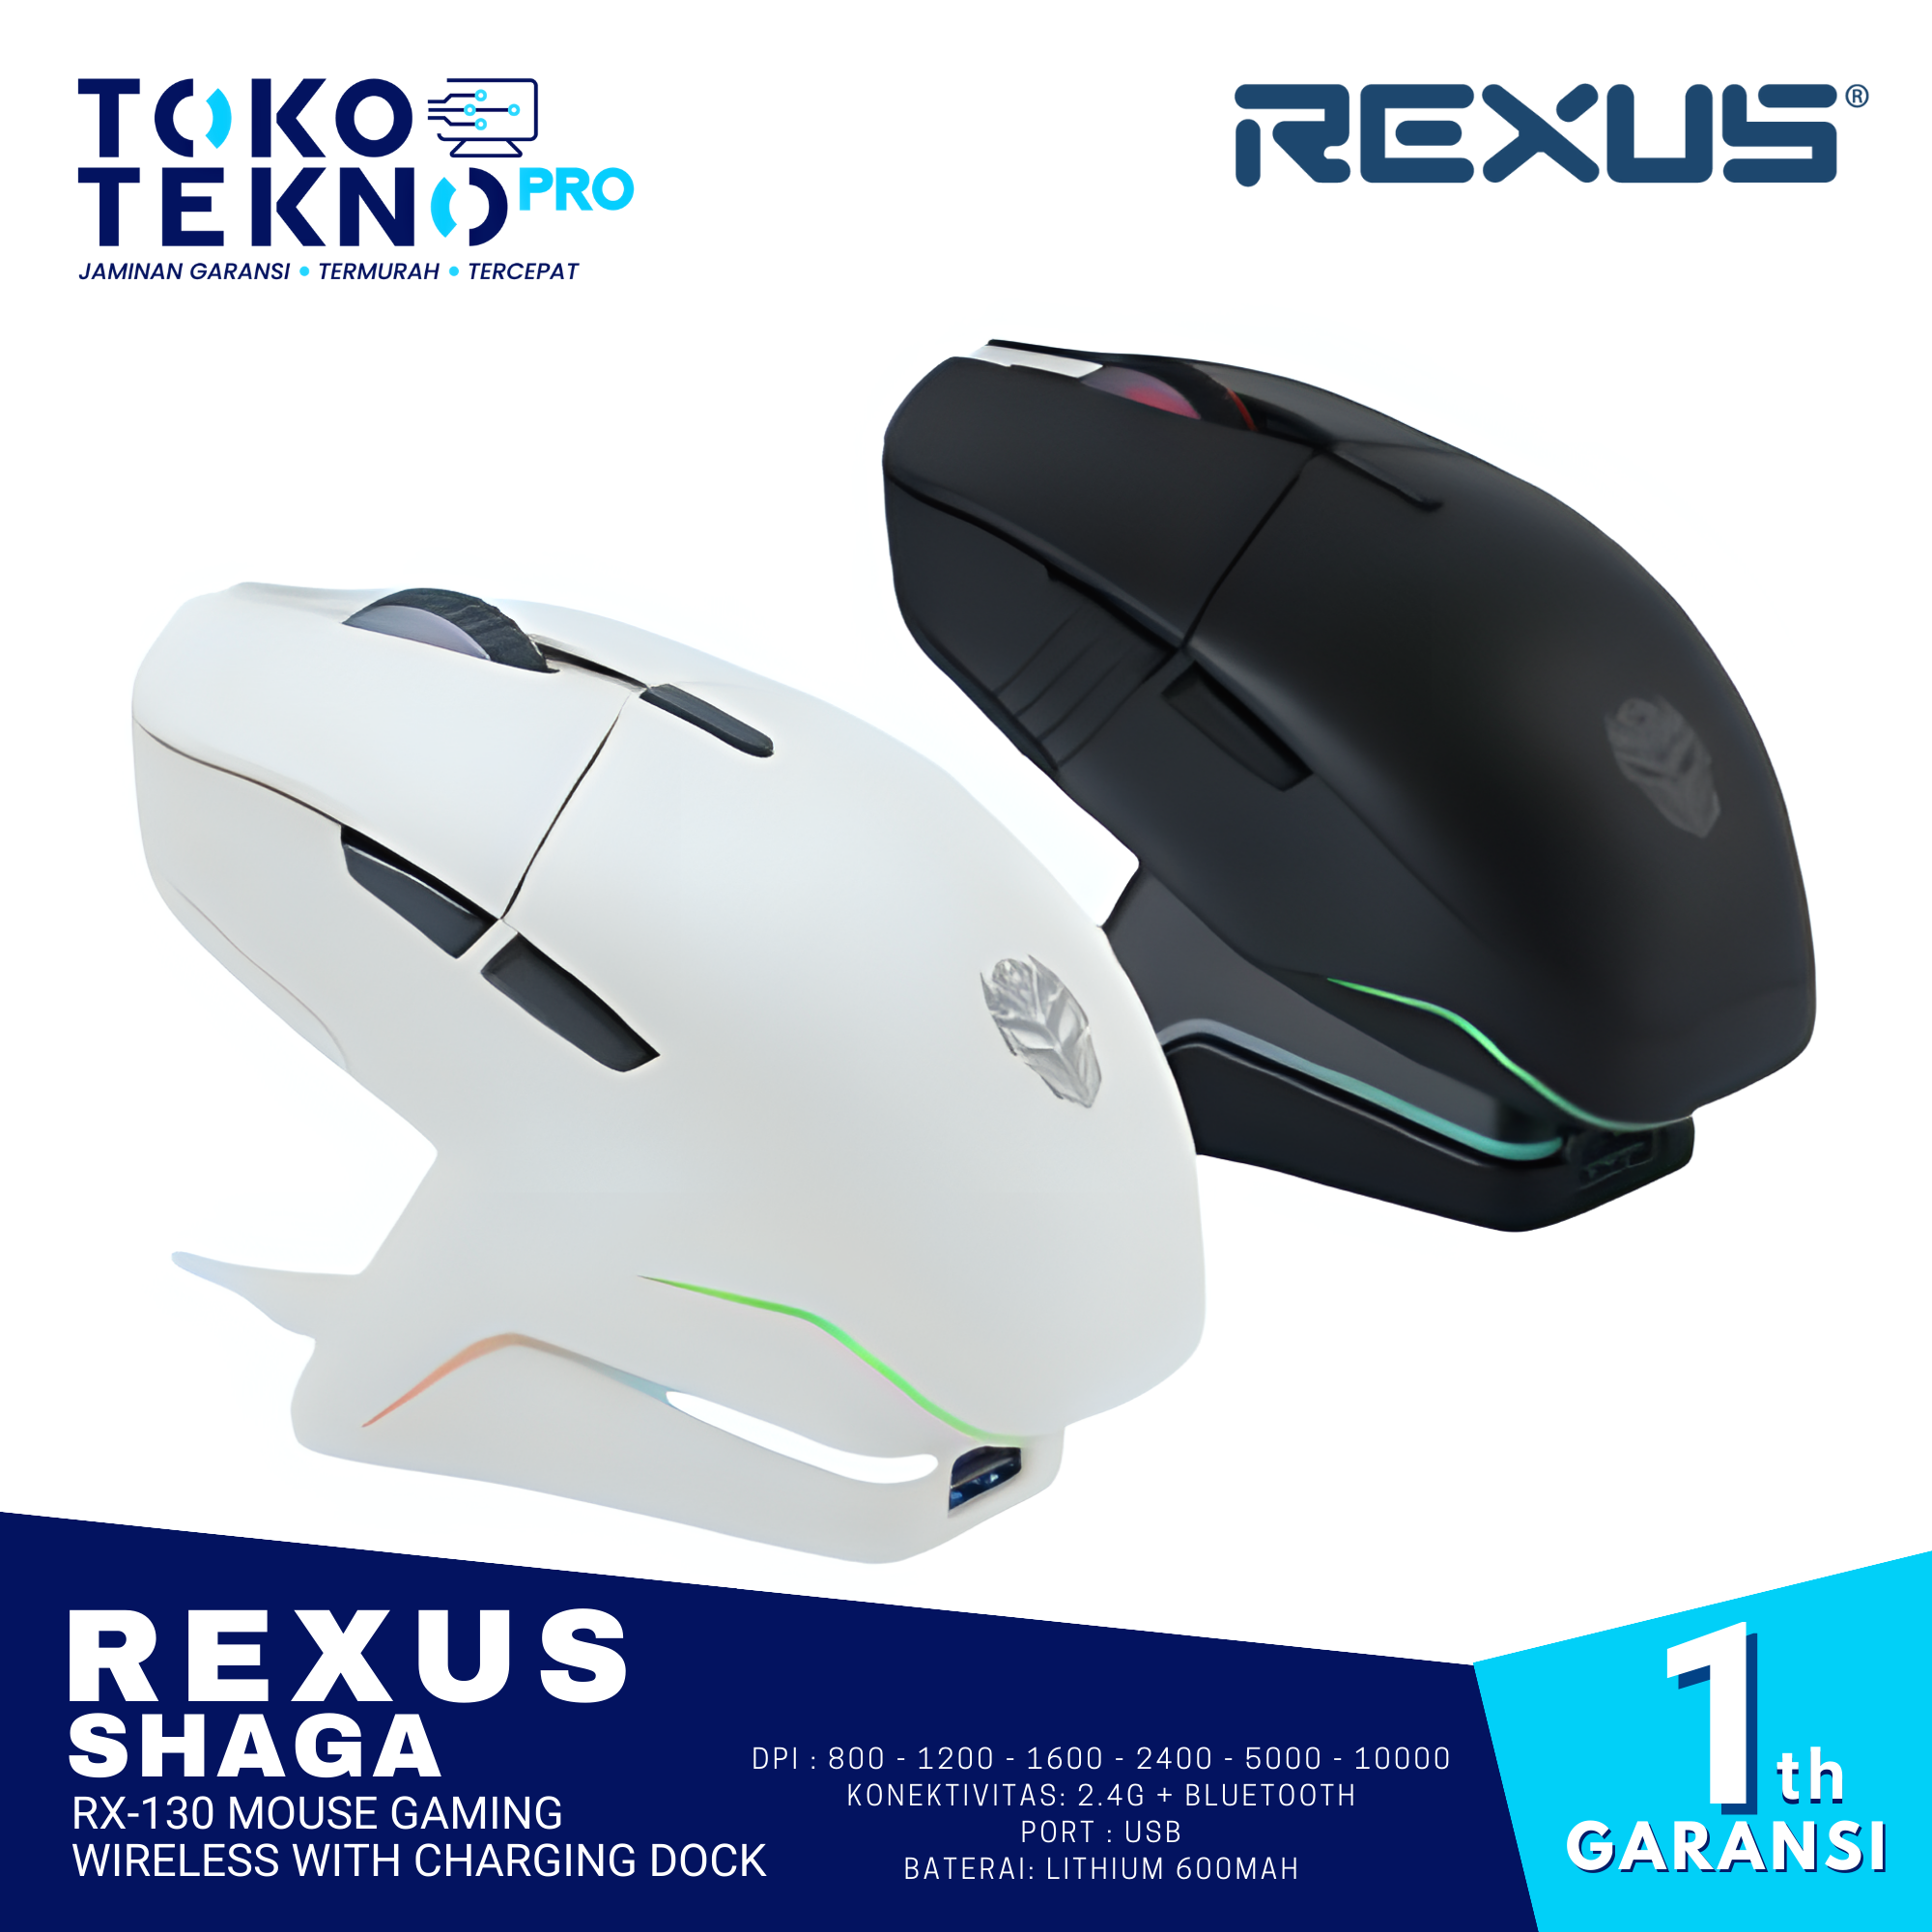 Rexus Shaga RX 130 Mouse Gaming Wireless With Charging Dock